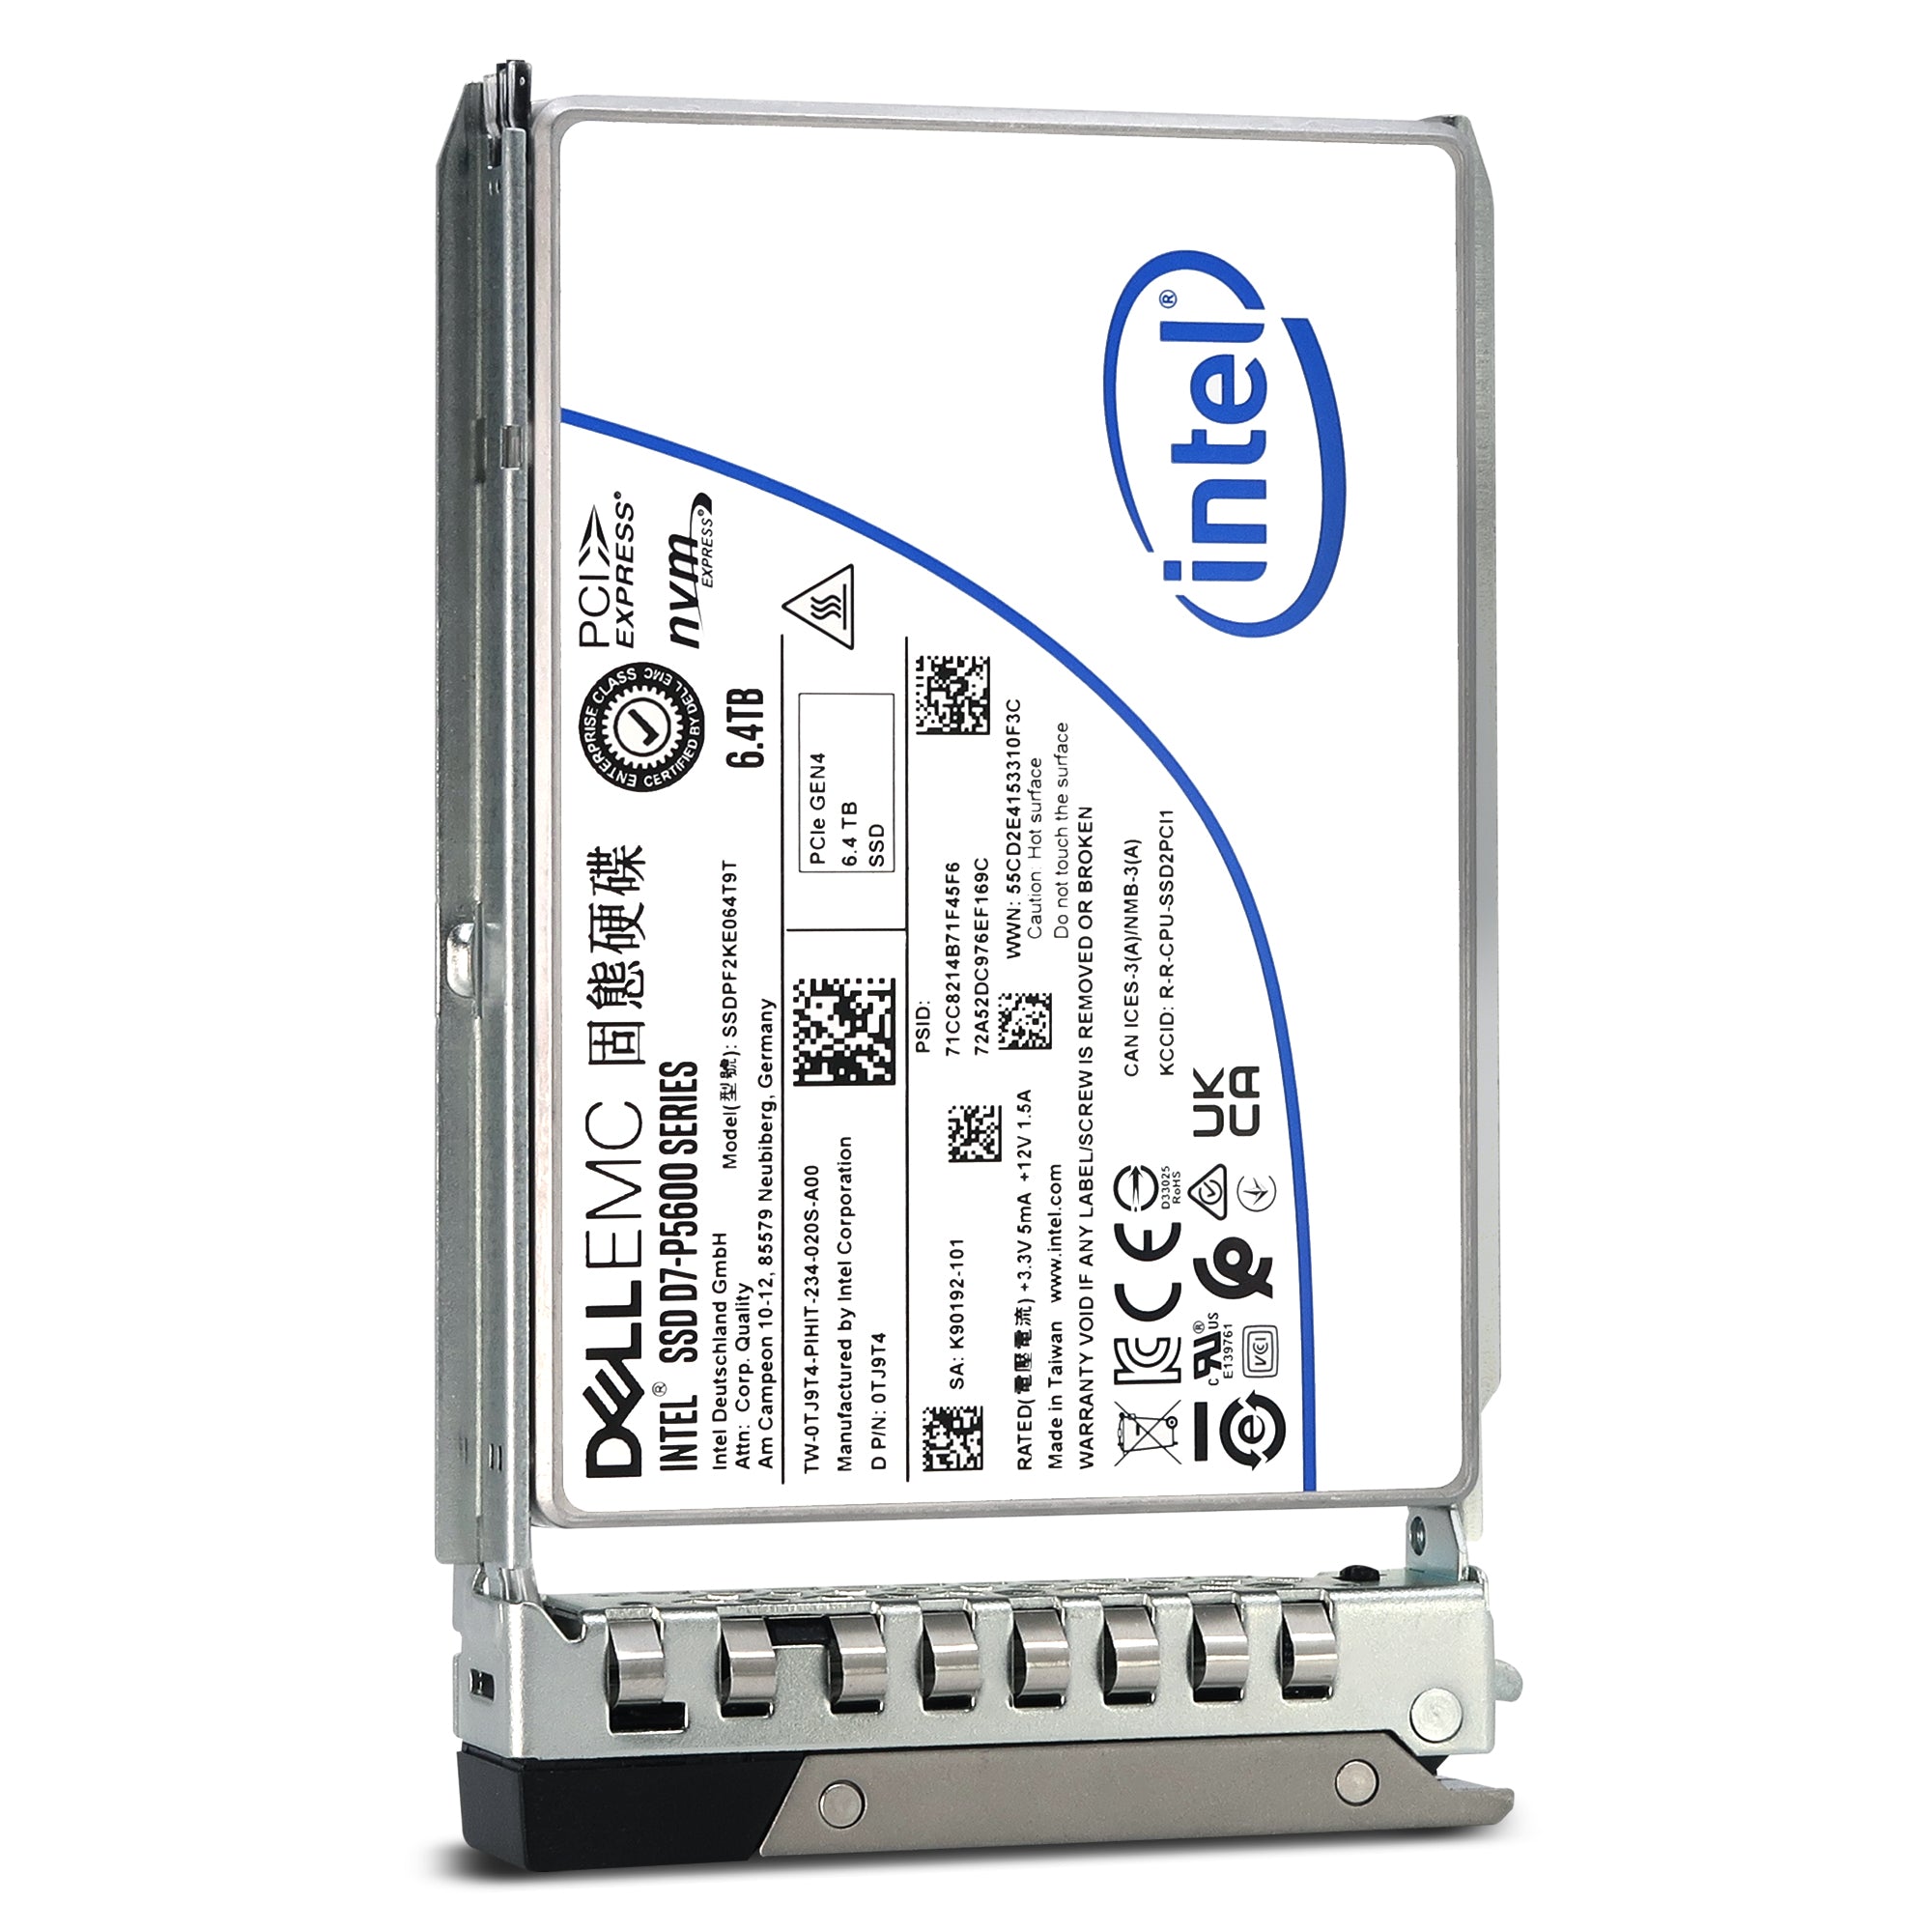 Dell G14 SSDPF2KE064T9TP 0TJ9T4 6.4TB PCIe Gen 4.0 x4 8GB/s 3D TLC 3DWPD SED U.2 NVMe 2.5in Solid State Drive - Front View